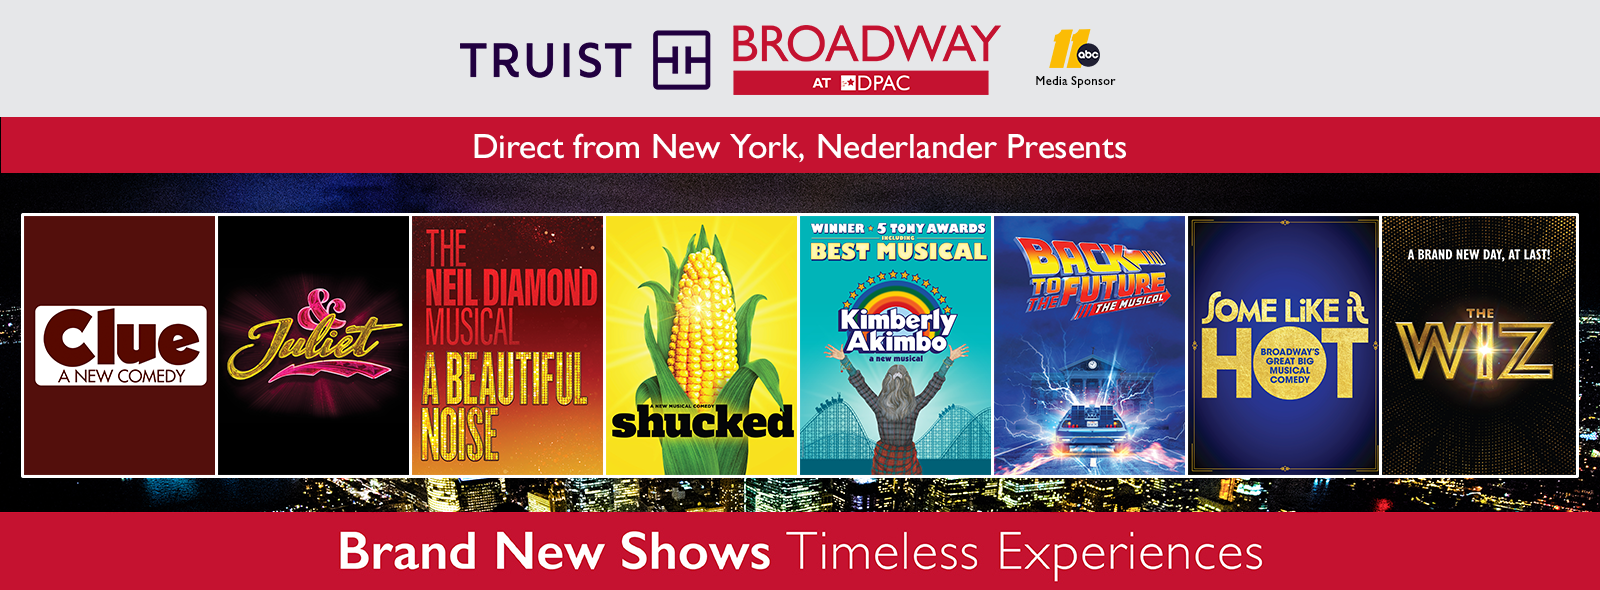 Become a Truist Broadway Member to Never Miss a Sellout